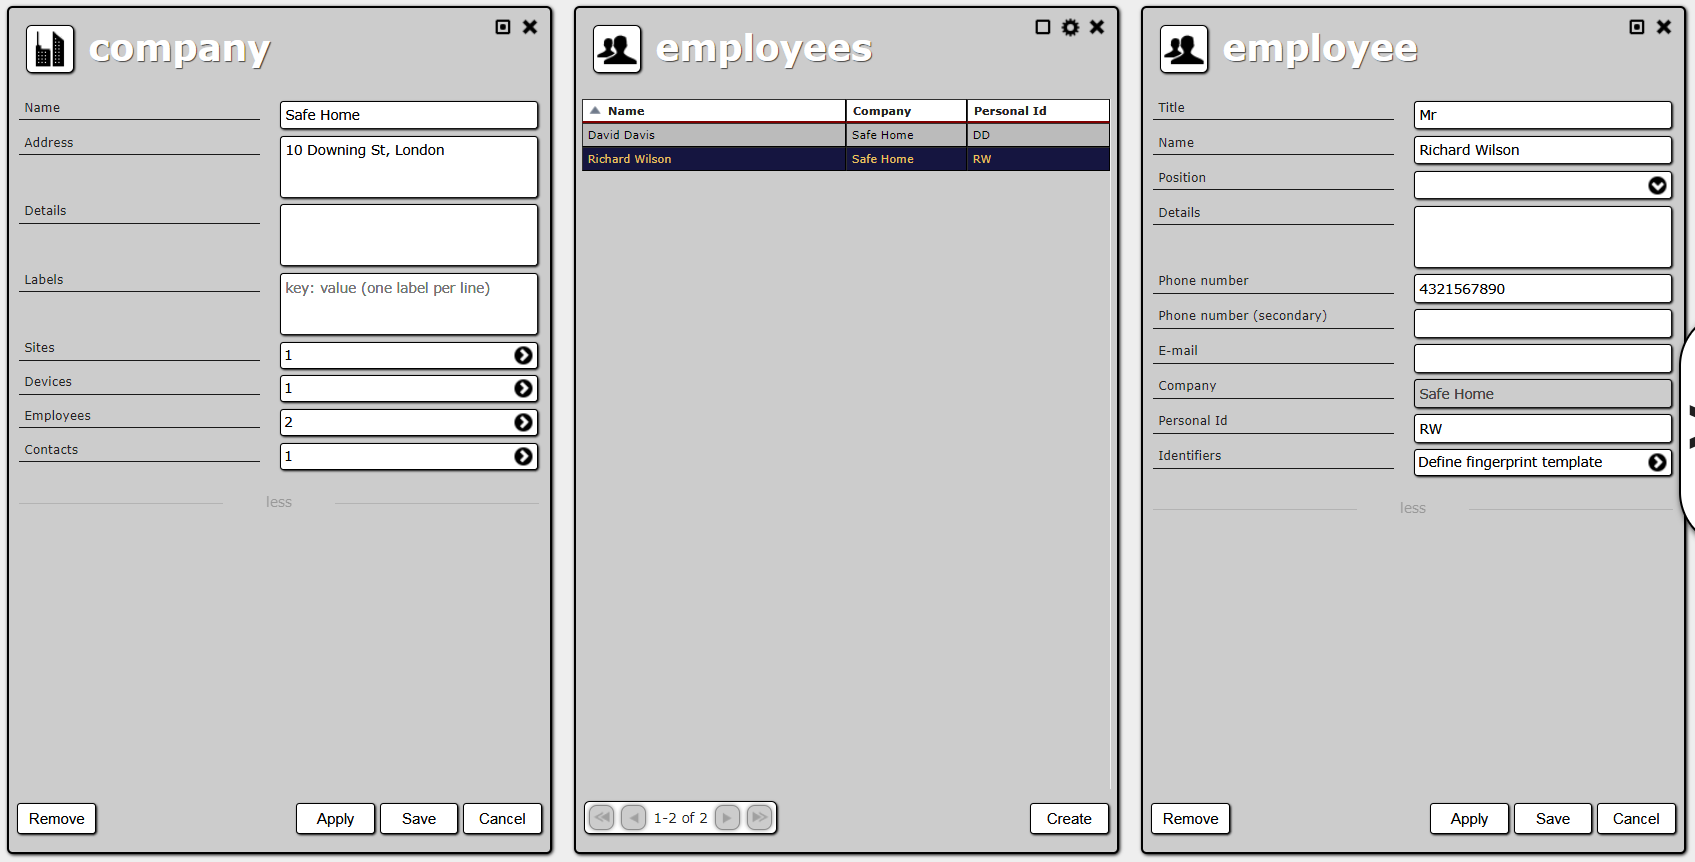 
Company details,employee list and employee details